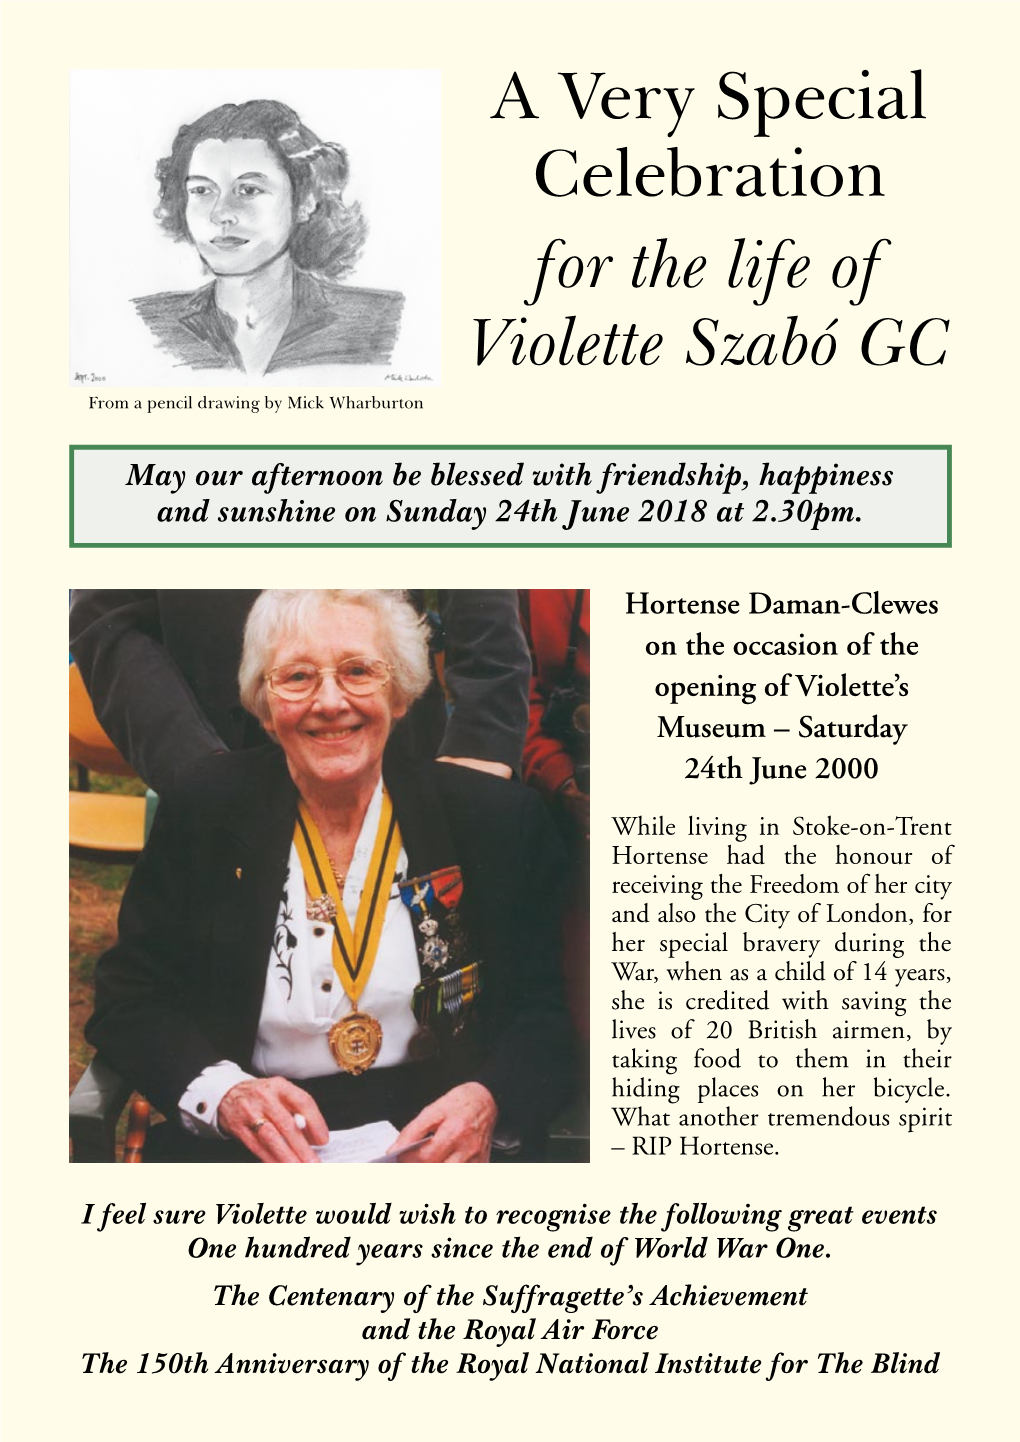 A Very Special Celebration for the Life of Violette Szabó GC from a Pencil Drawing by Mick Wharburton